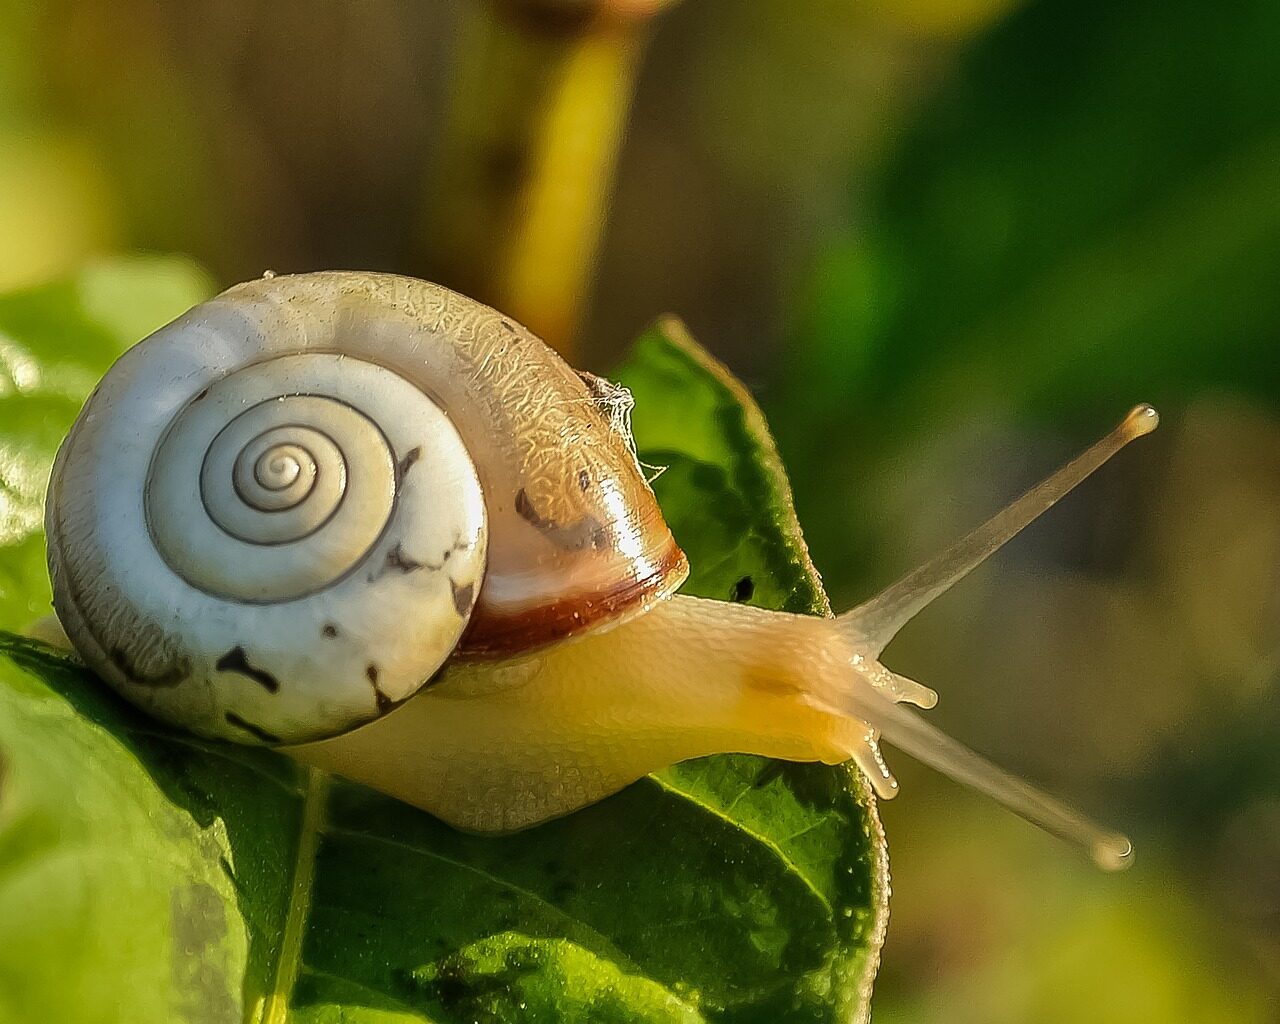 How To Keep Snails As Pets?